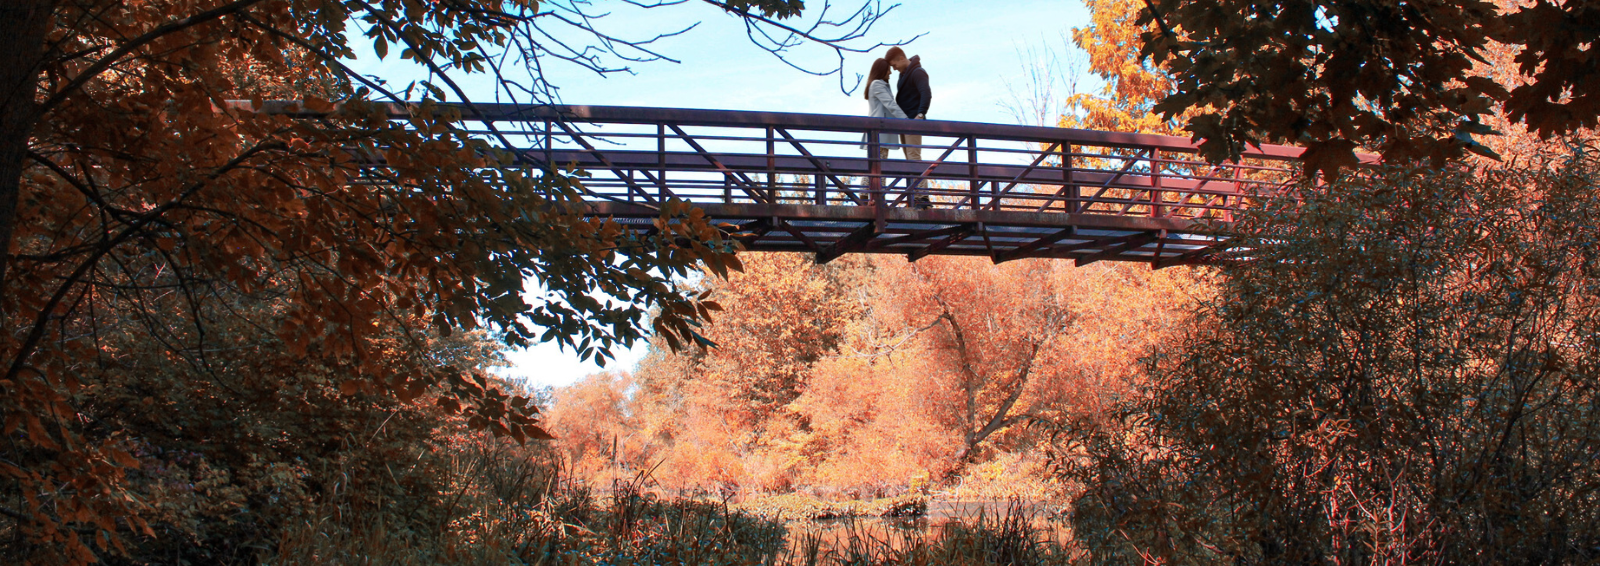 A couple stands on a bridge over a creek surrounded by trees in autumn